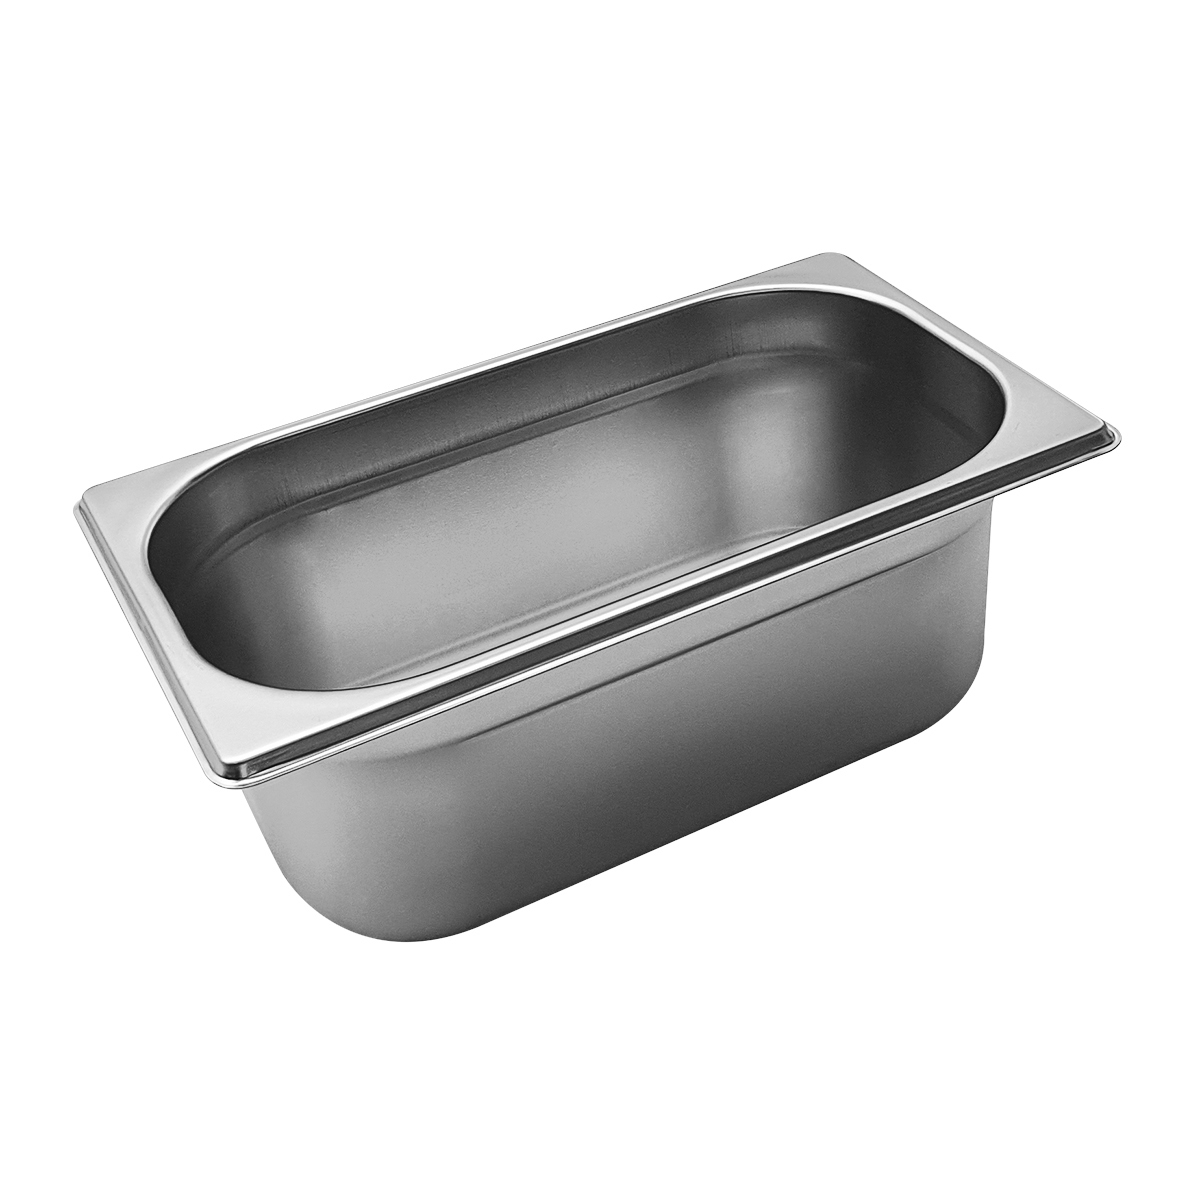 Cater-Cook 1/4 Stainless Steel Gastronorm Container 100mm Deep - CK4025